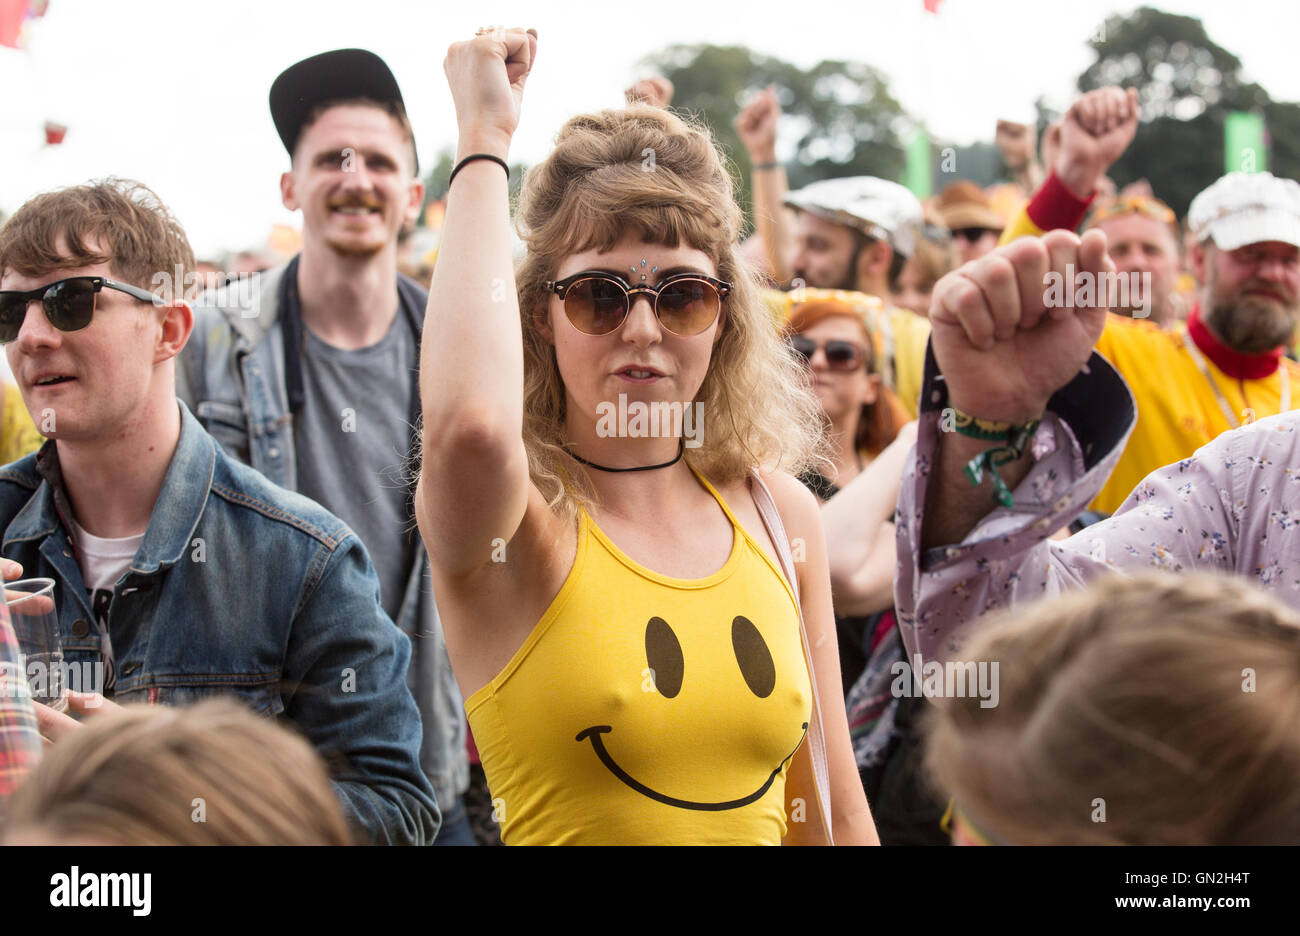 Yellow clad Colonel Mustard music fans Electric Fields music festival at Drumlanrig Castle, Dumfries and Galloway Scotland. Stock Photo